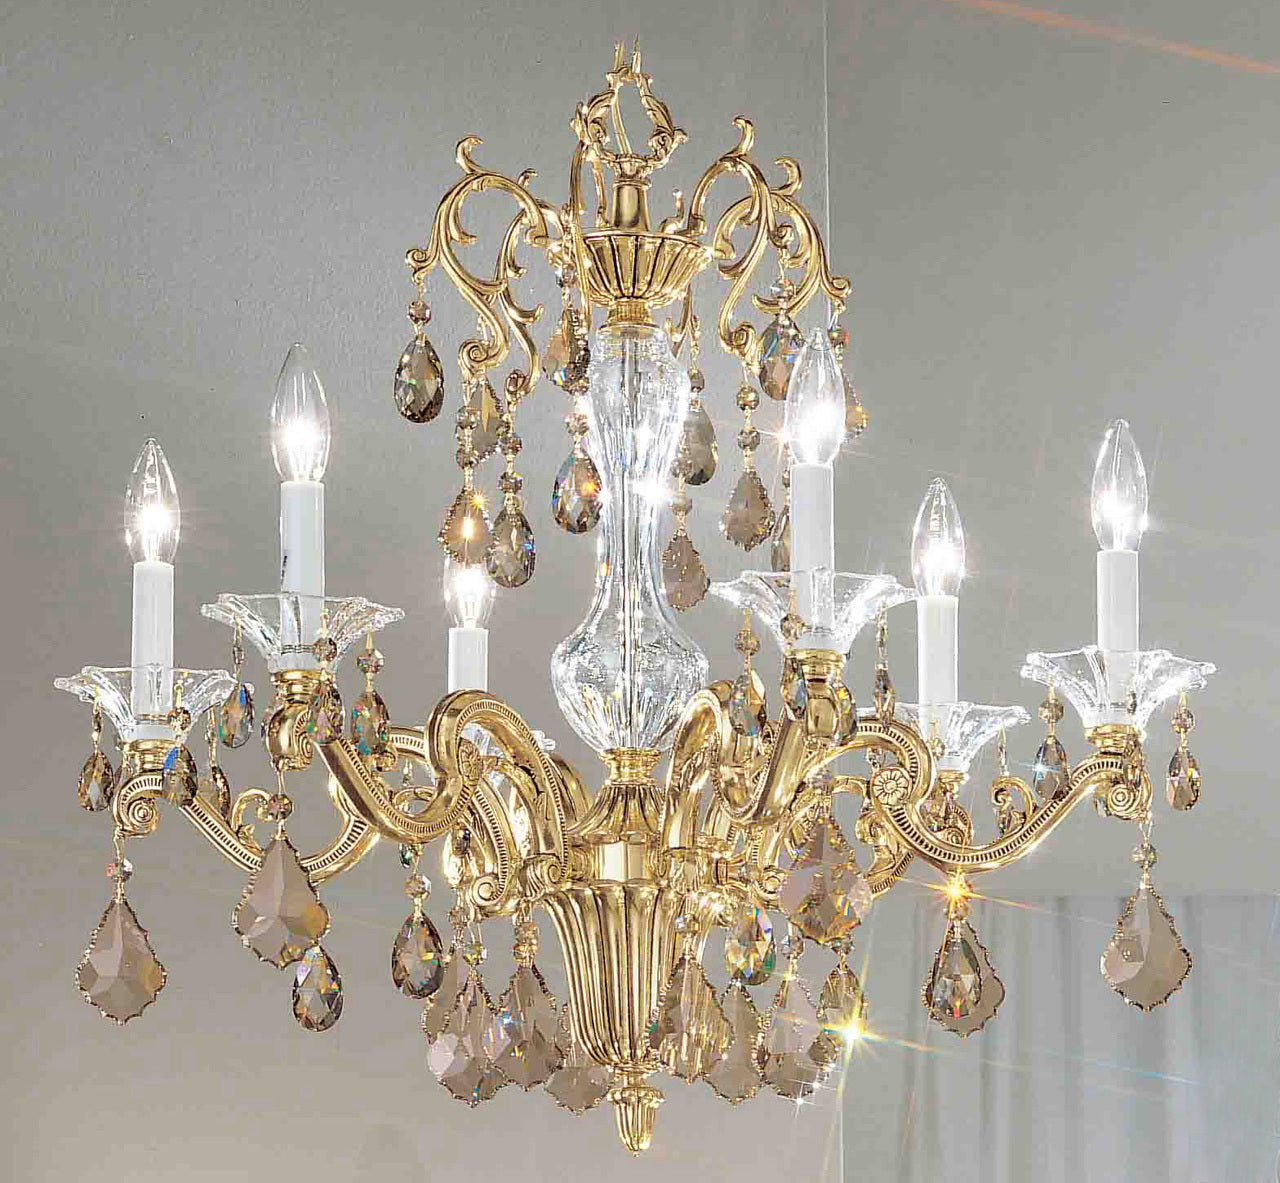 Classic Lighting 57106 BBK SGT Via Firenze Crystal Chandelier in Bronze/Black Patina (Imported from Spain)